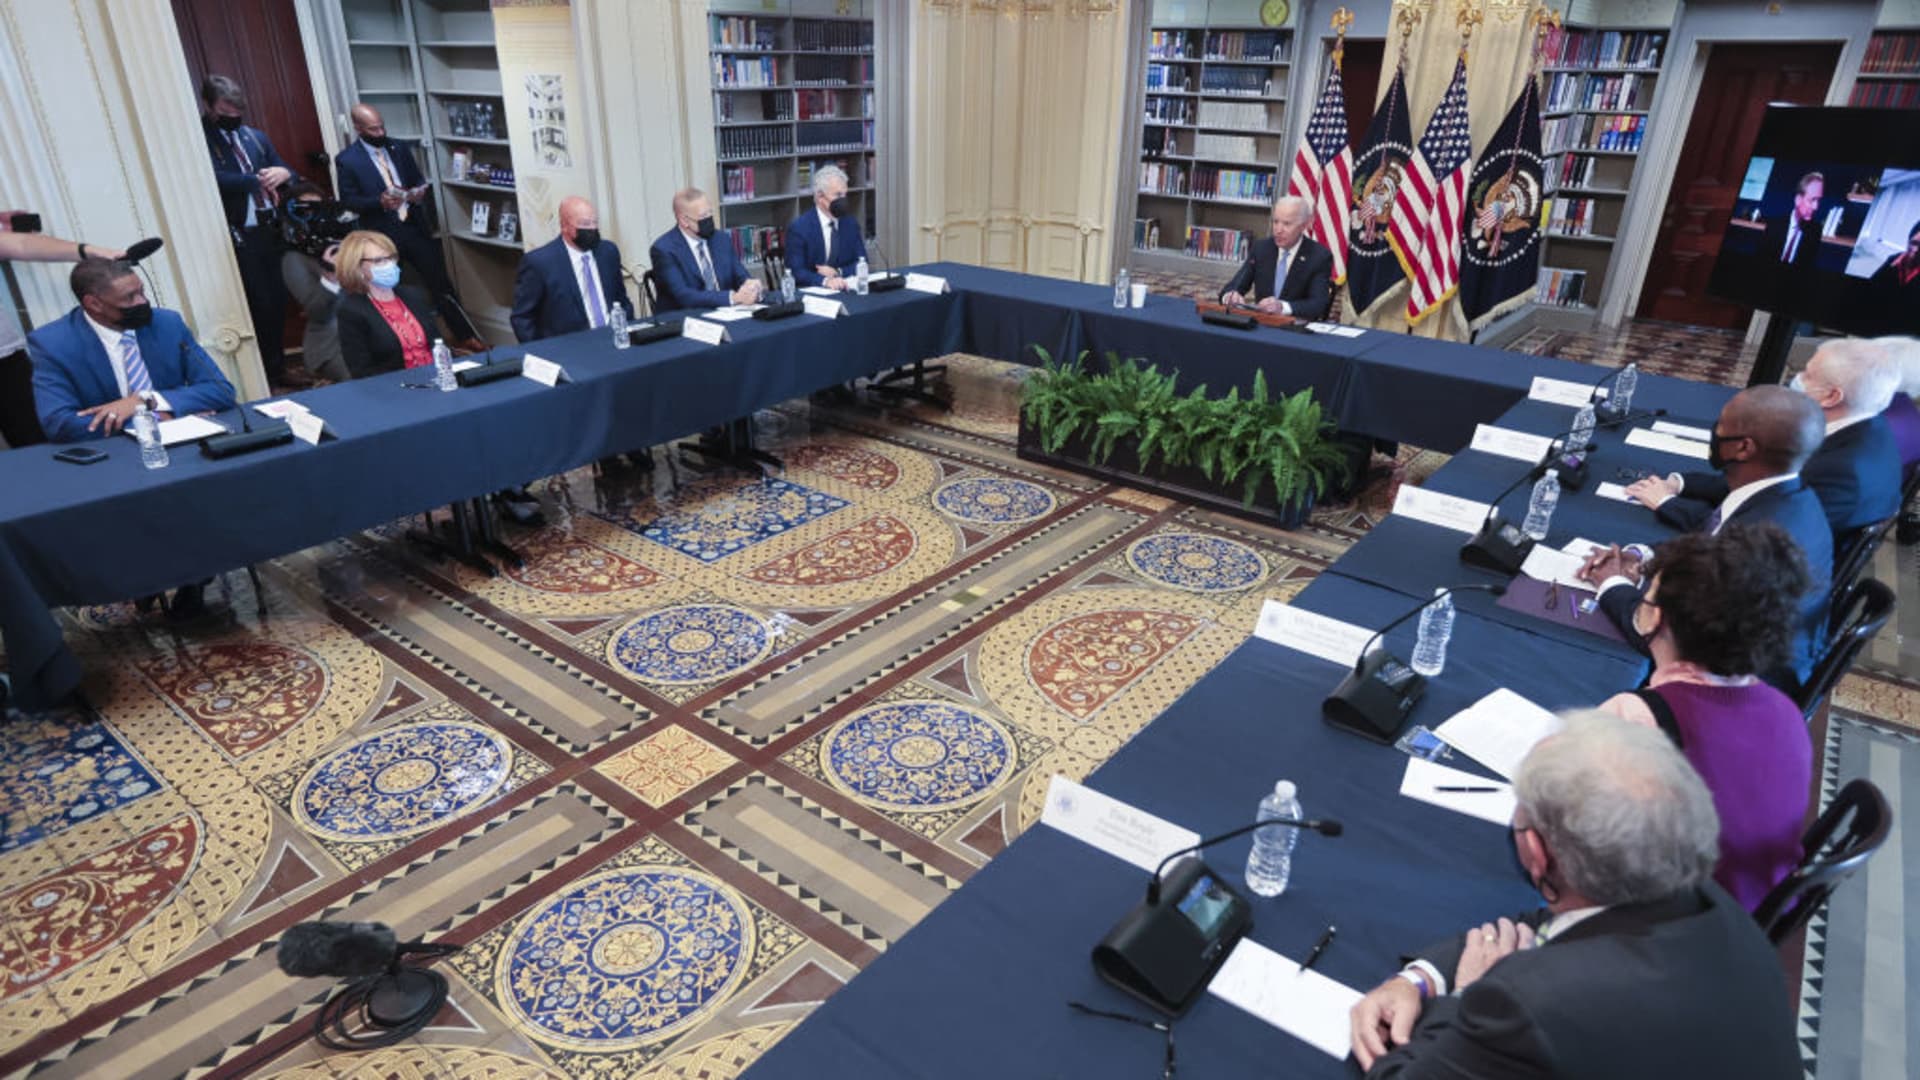 U.S. President Joe Biden, center, speaks during a meeting in the Eisenhower Executive Office Building Library in Washington, D.C., U.S., on Wednesday, Sept. 15, 2021.